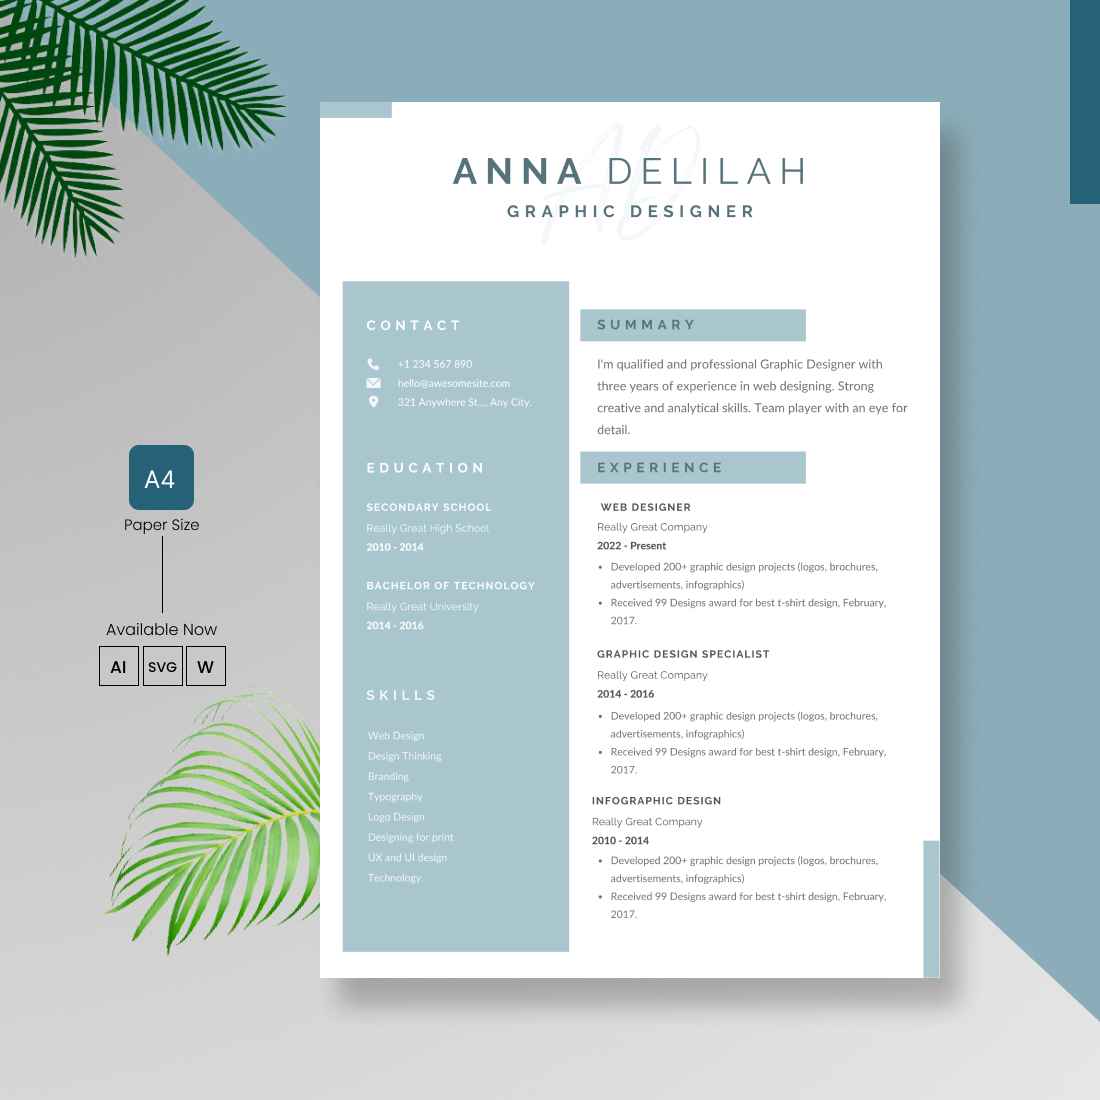 Blue and white resume with a palm tree.